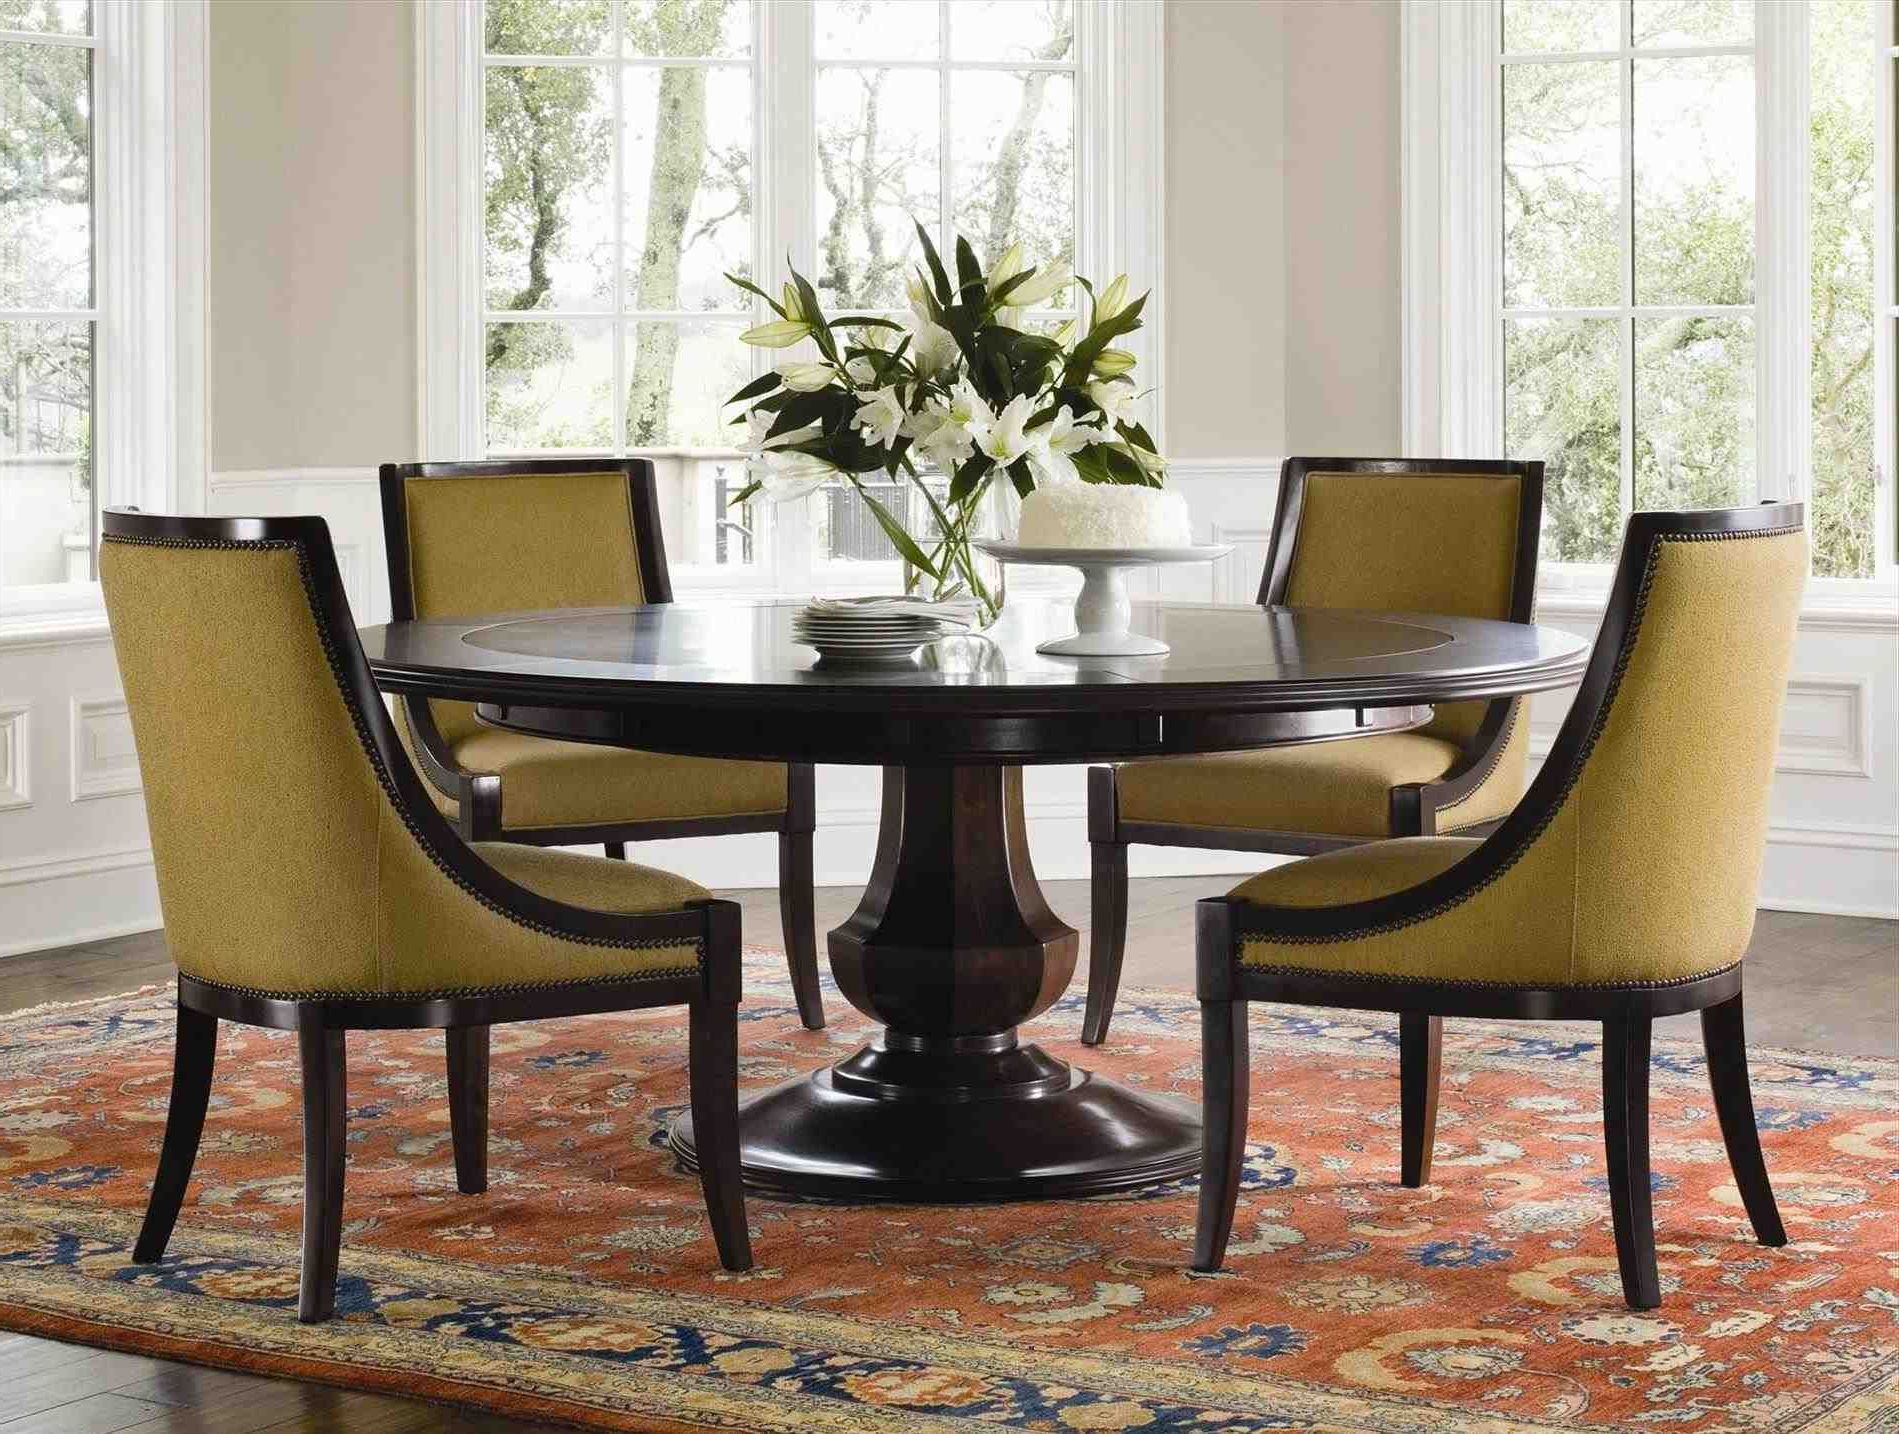 Round Pedestal Dining Tables With One Leaf In Trendy New Round Dining Room Sets With Leaf At Temasistemi (View 9 of 20)